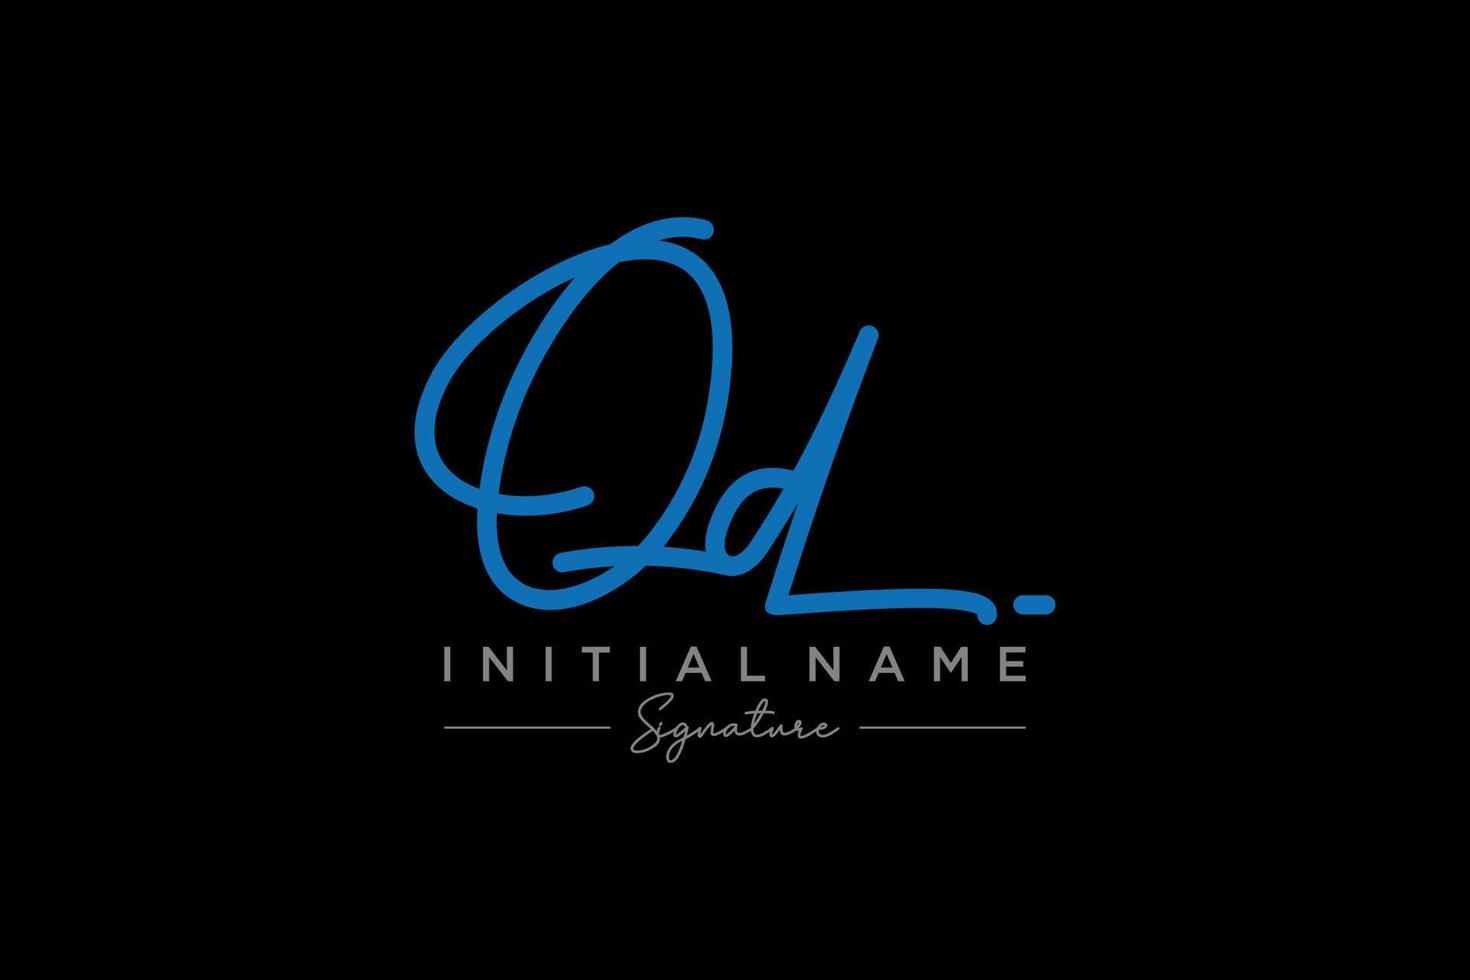 Initial QD signature logo template vector. Hand drawn Calligraphy lettering Vector illustration.